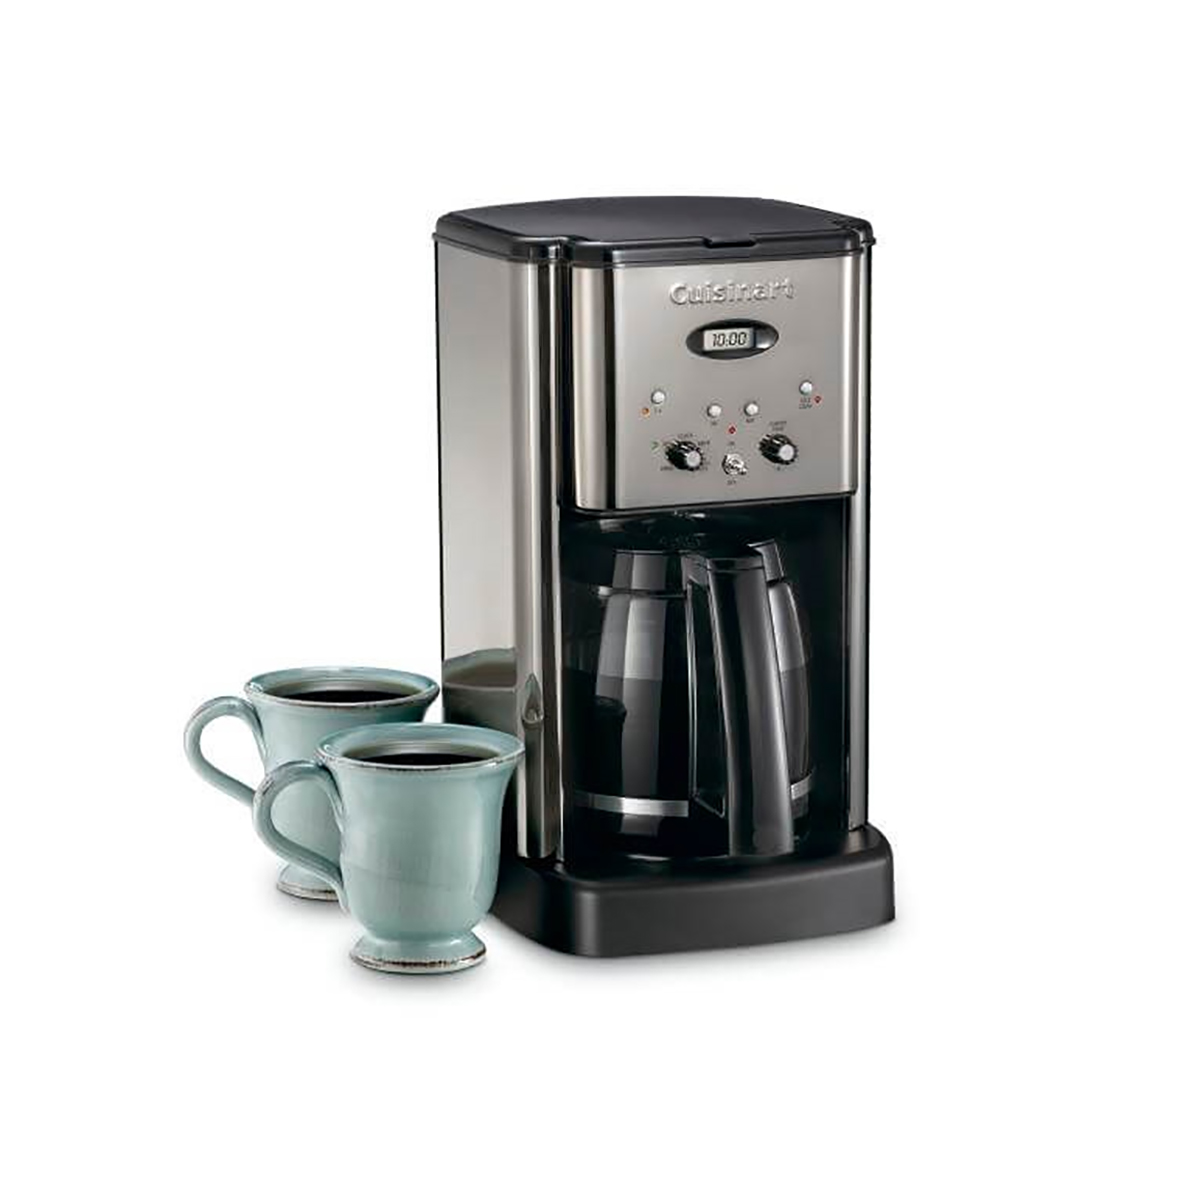 Cuisinart(R) 12 Cup Coffee Maker